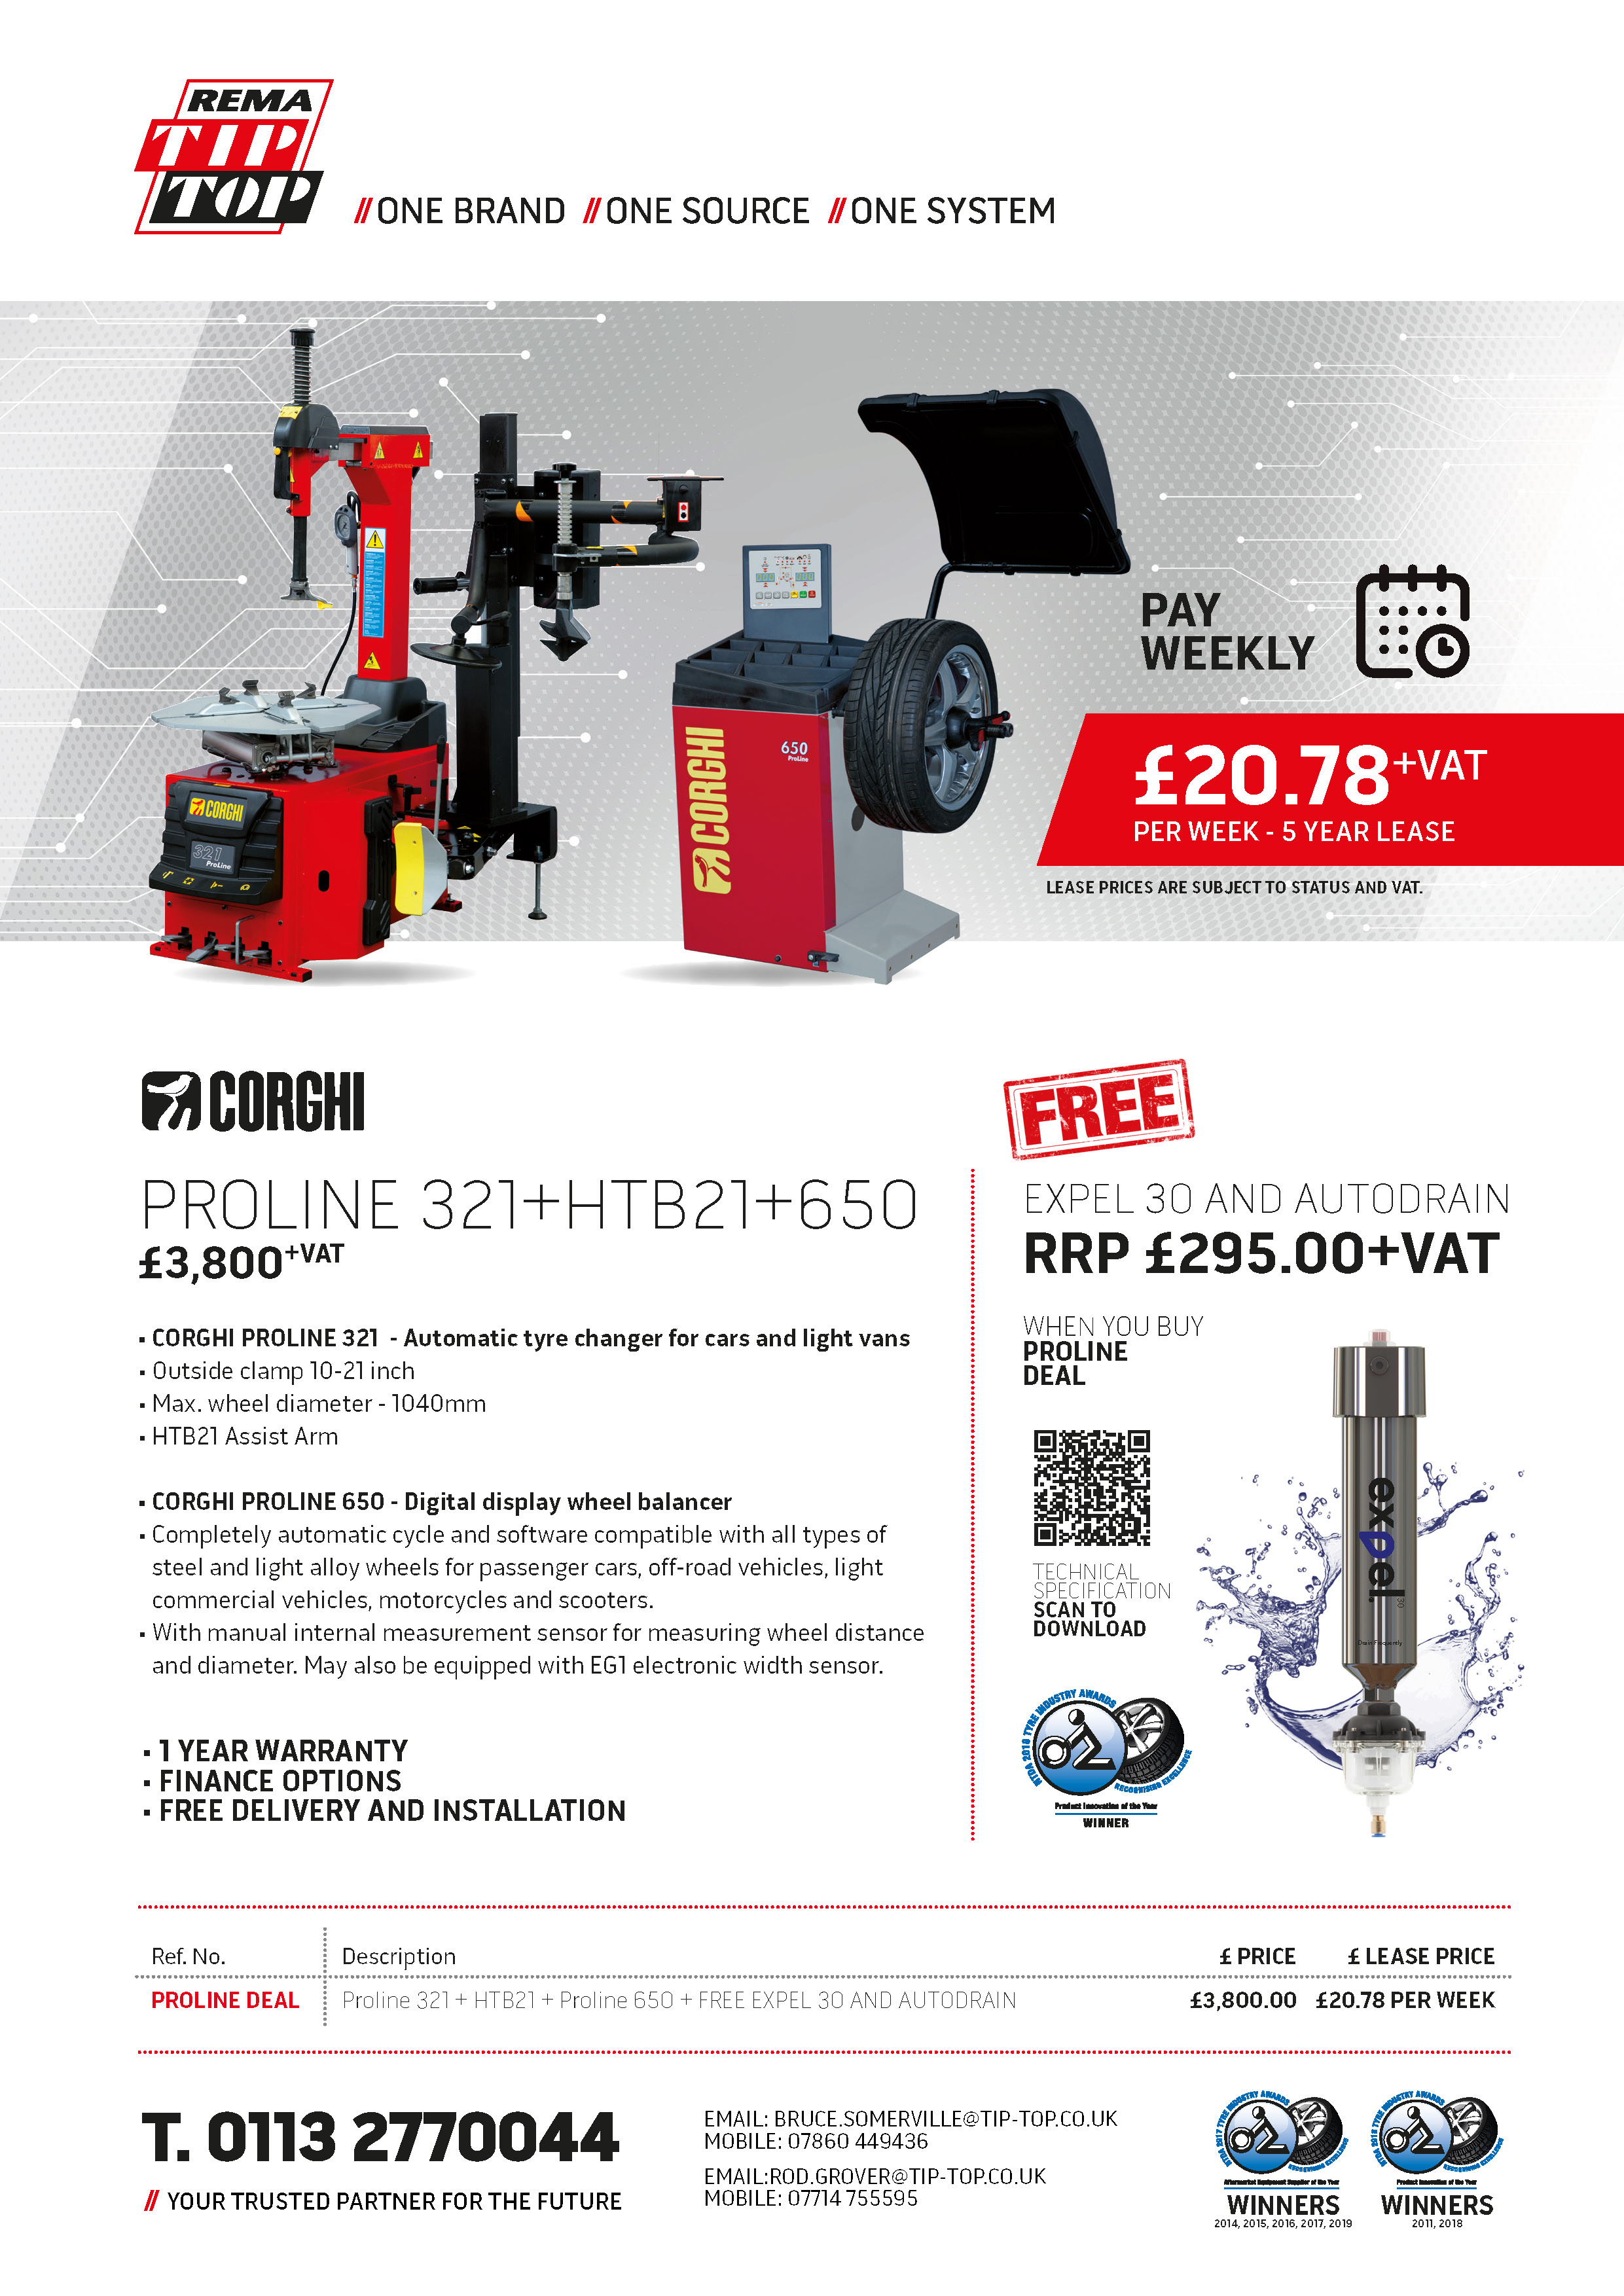 REMA TIP TOP UK on Twitter: "FREE EXPEL 30 (RRP £295+VAT) when you purchase the Corghi Proline 321 changer with assist arm and Proline 650 wheel balancer package deal. Weekly cost @ £